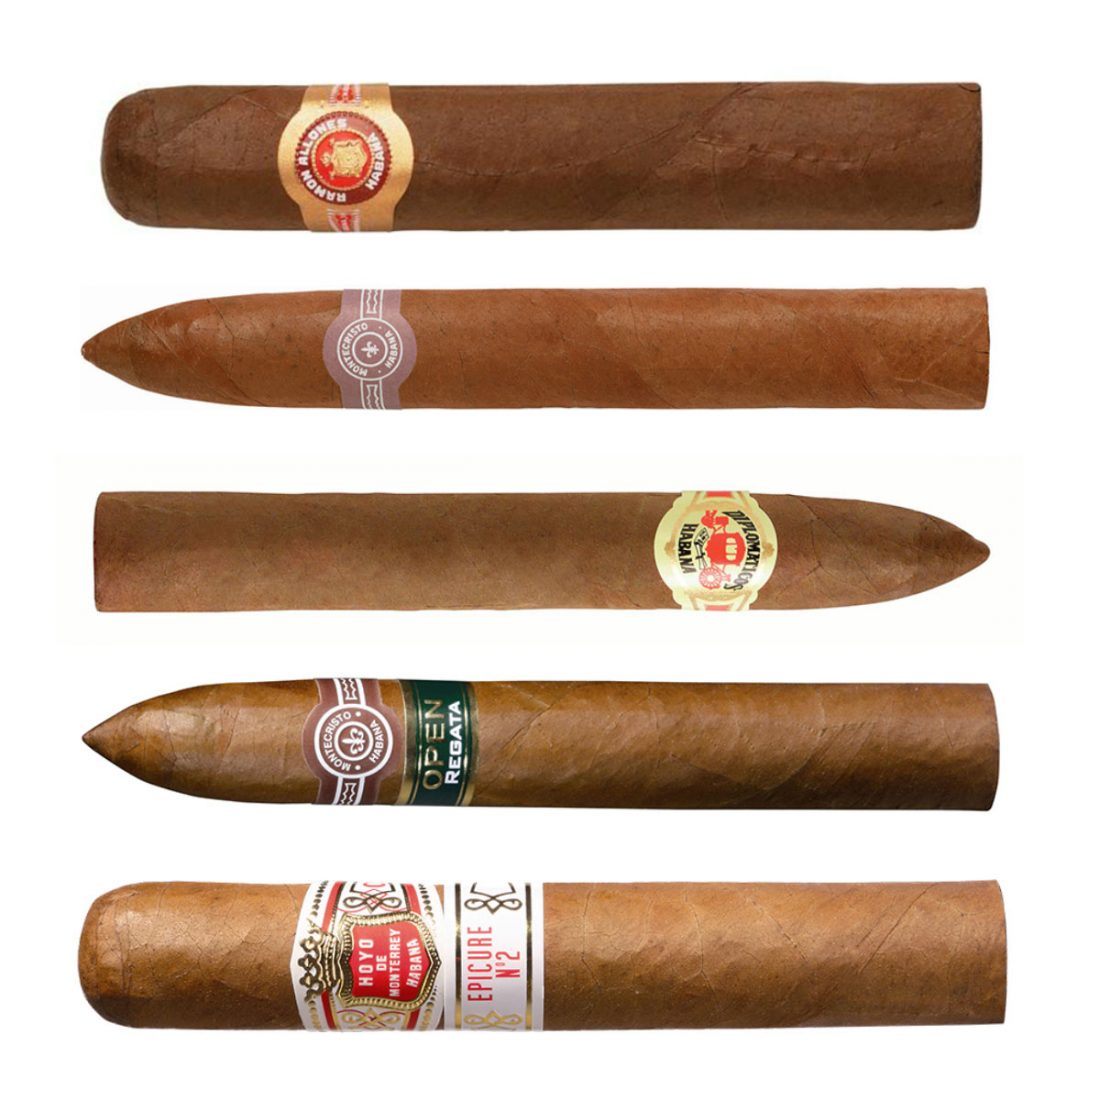 This week's Top 5 cigars from Kelly Cates